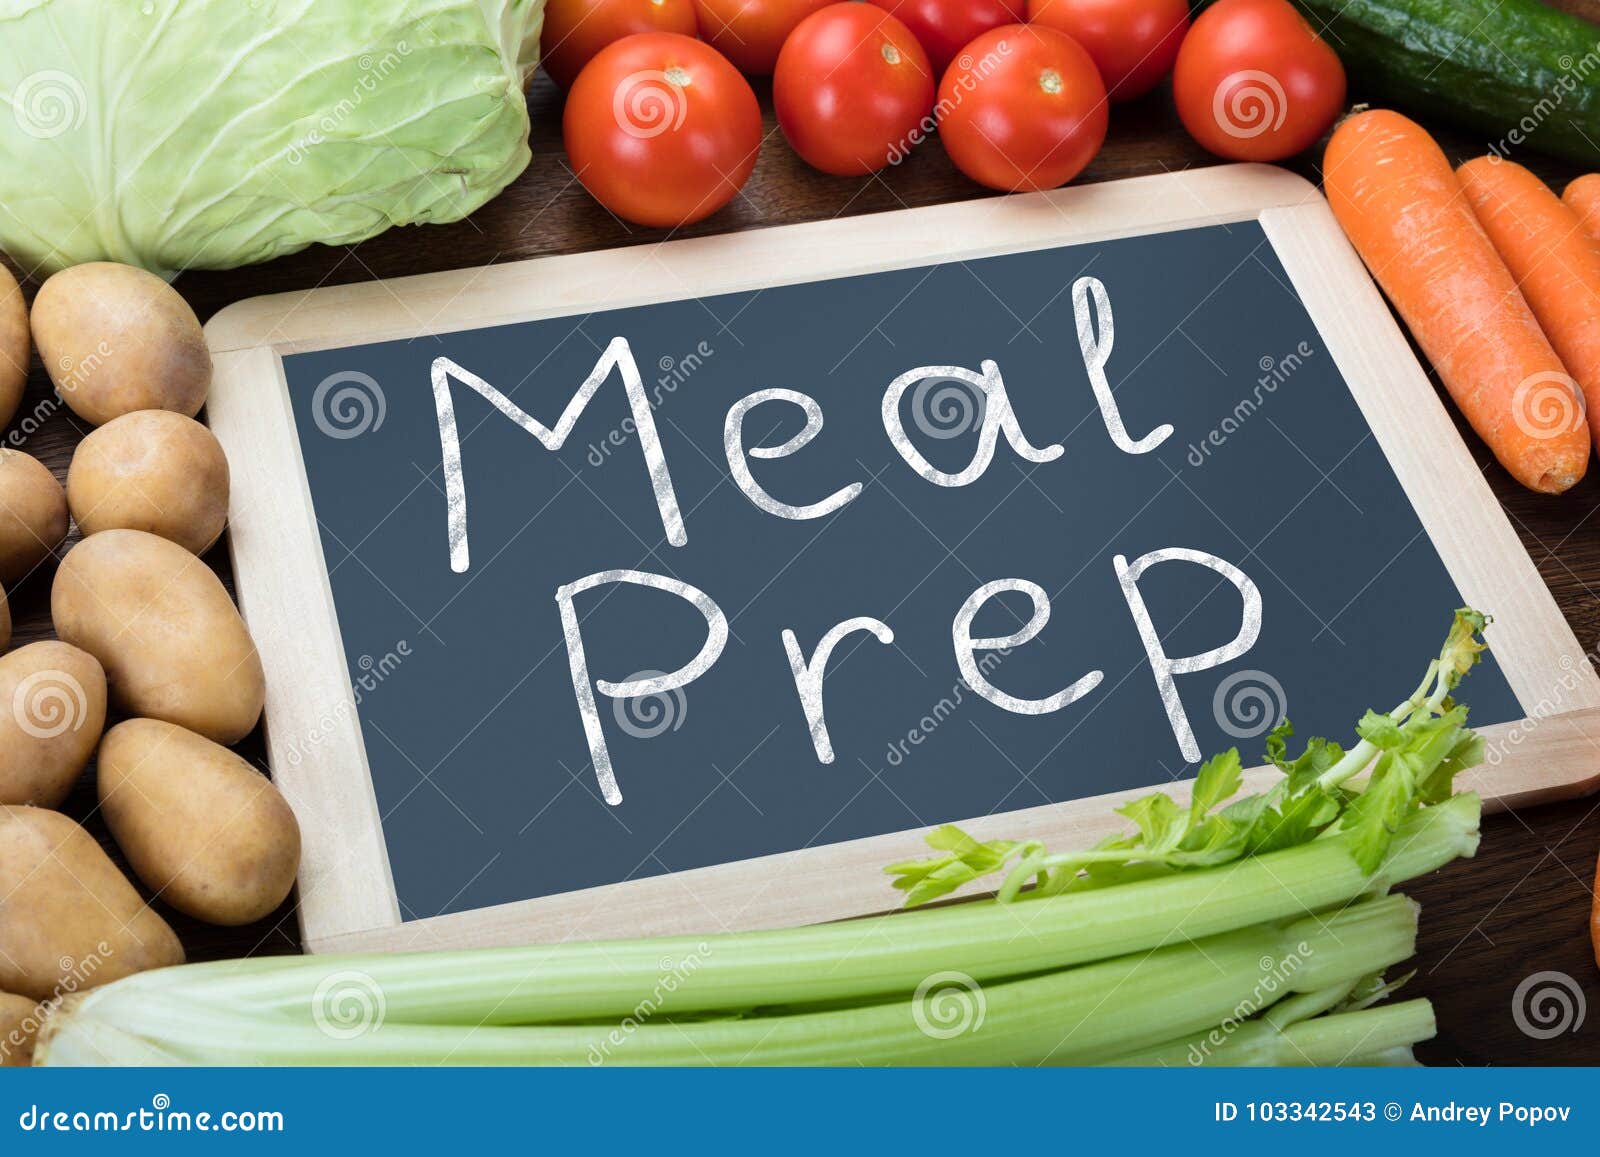 meal preparation words on slate with vegetables